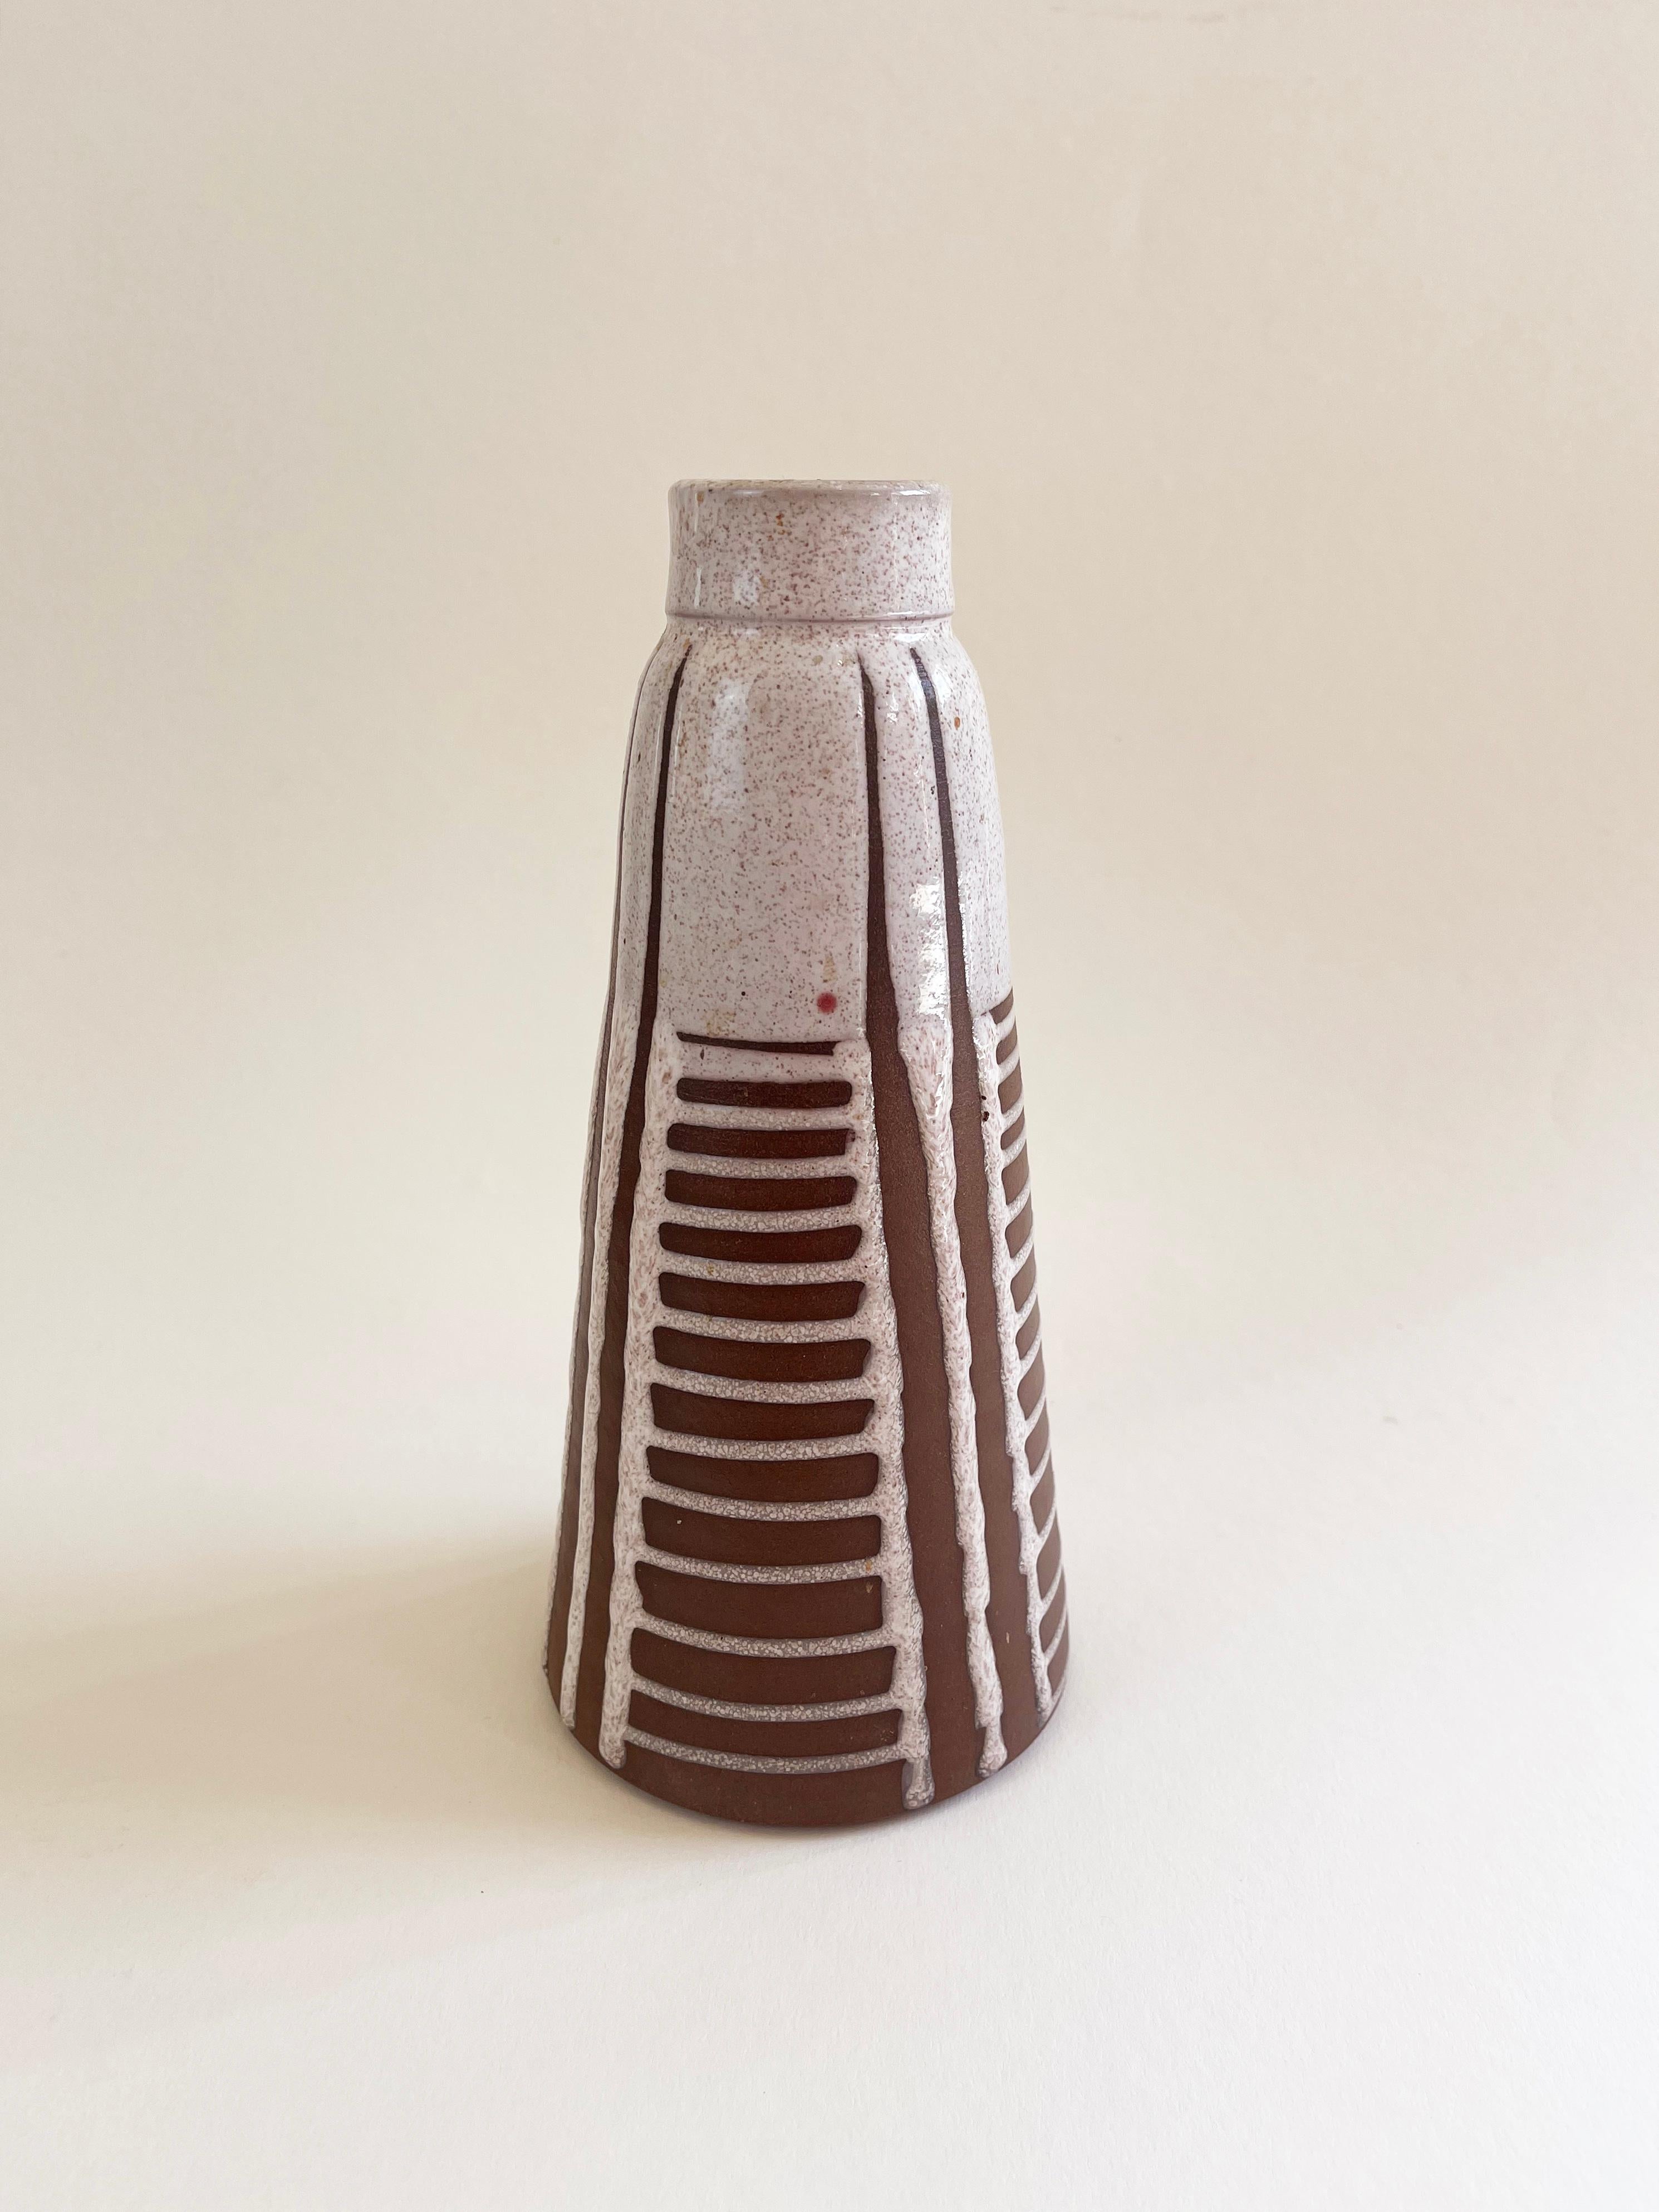 Expressive Scandinavian style Mid Century Modern handmade ceramic vase with an enthnical abstract pattern.
Fat Lava ceramic in beige with tiny dots on a ''spared'' dark coffee brown base material.
The glaze at the inner rim comes in a mottled